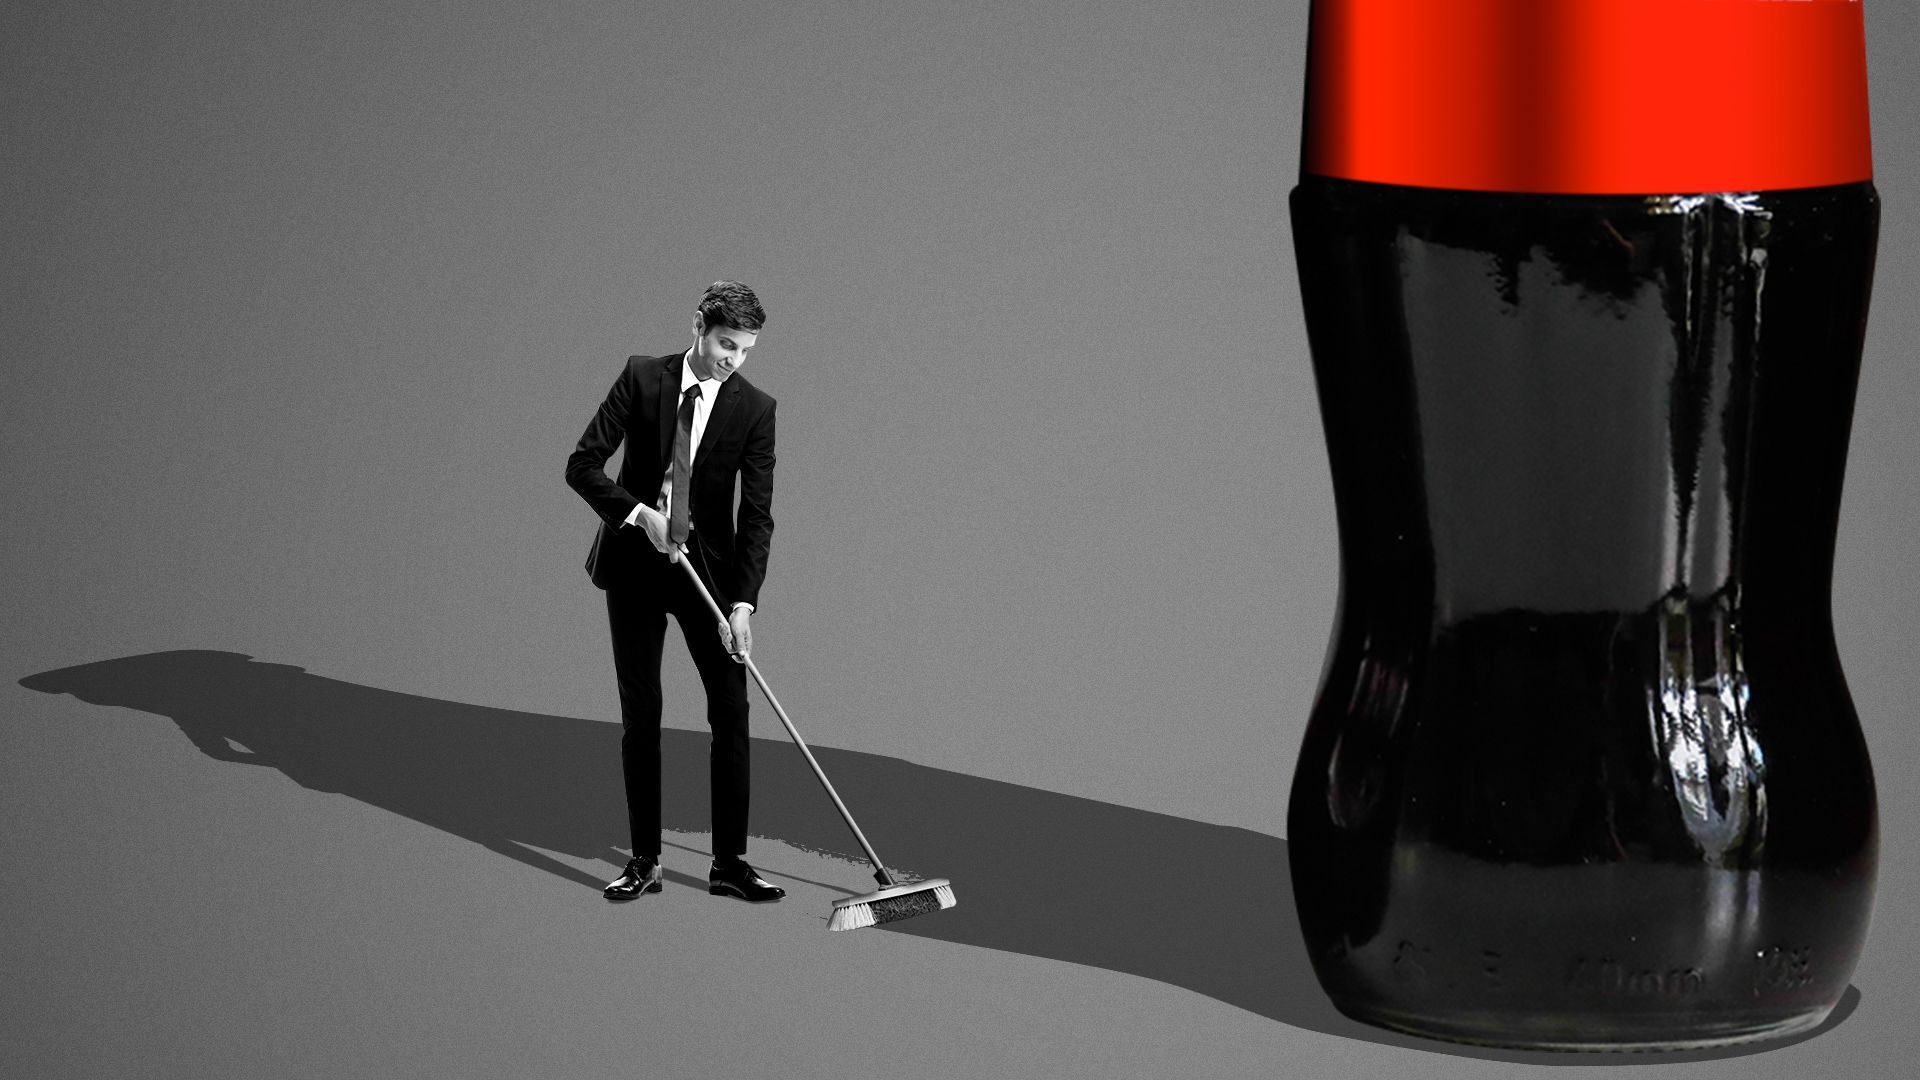 Illustration of a person sweeping up the shadow being cast from a giant Coca-Cola bottle.